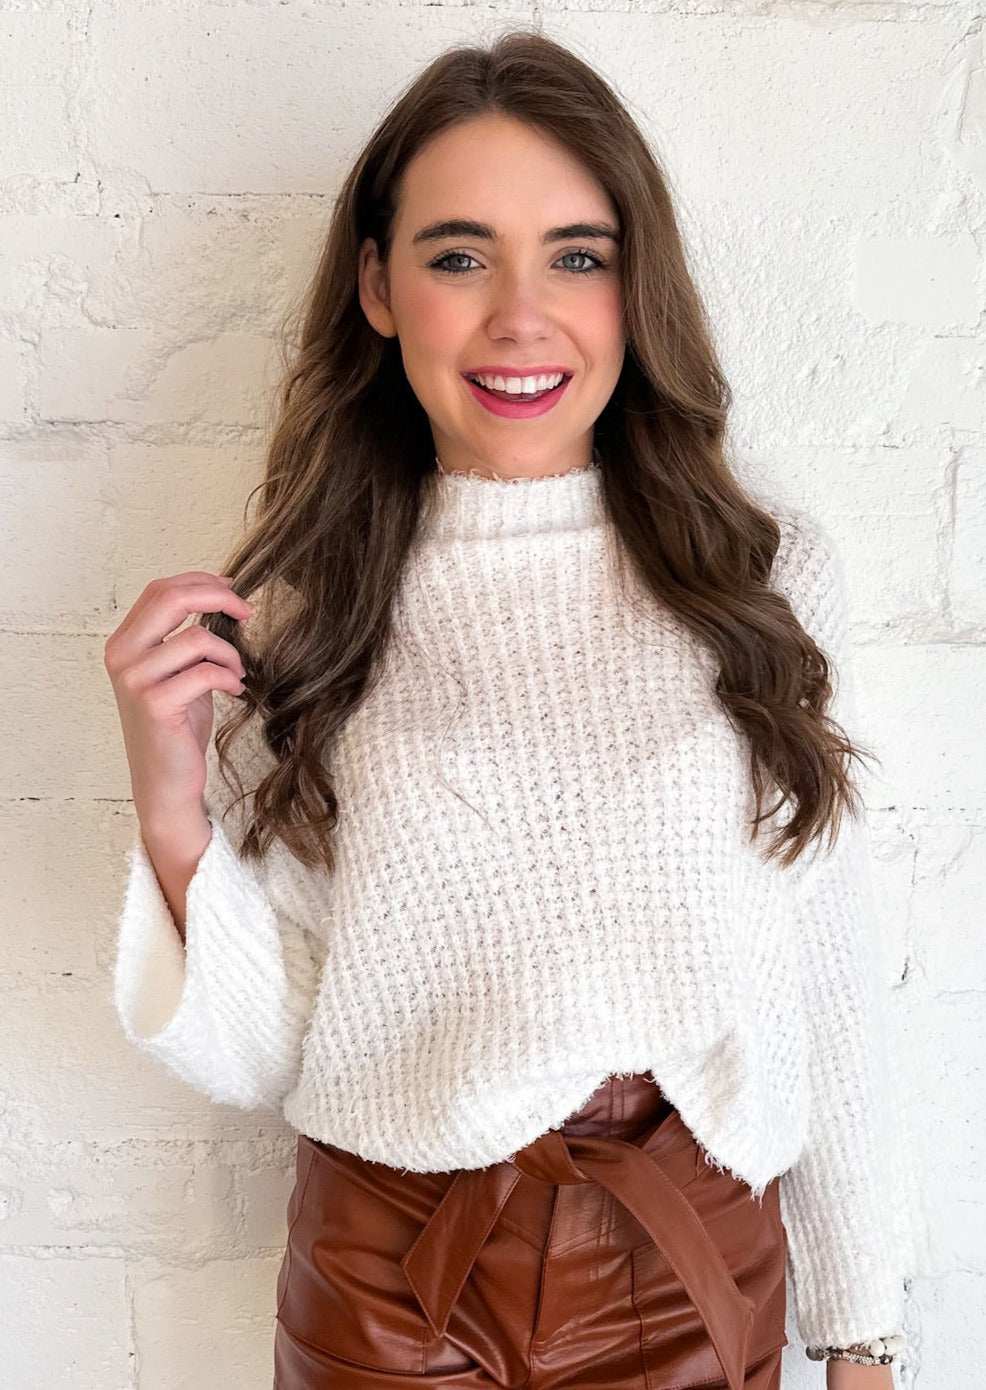 Cold Days Knit Top, Tops, Adeline, Adeline, dallas boutique, dallas texas, texas boutique, women's boutique dallas, adeline boutique, dallas boutique, trendy boutique, affordable boutique